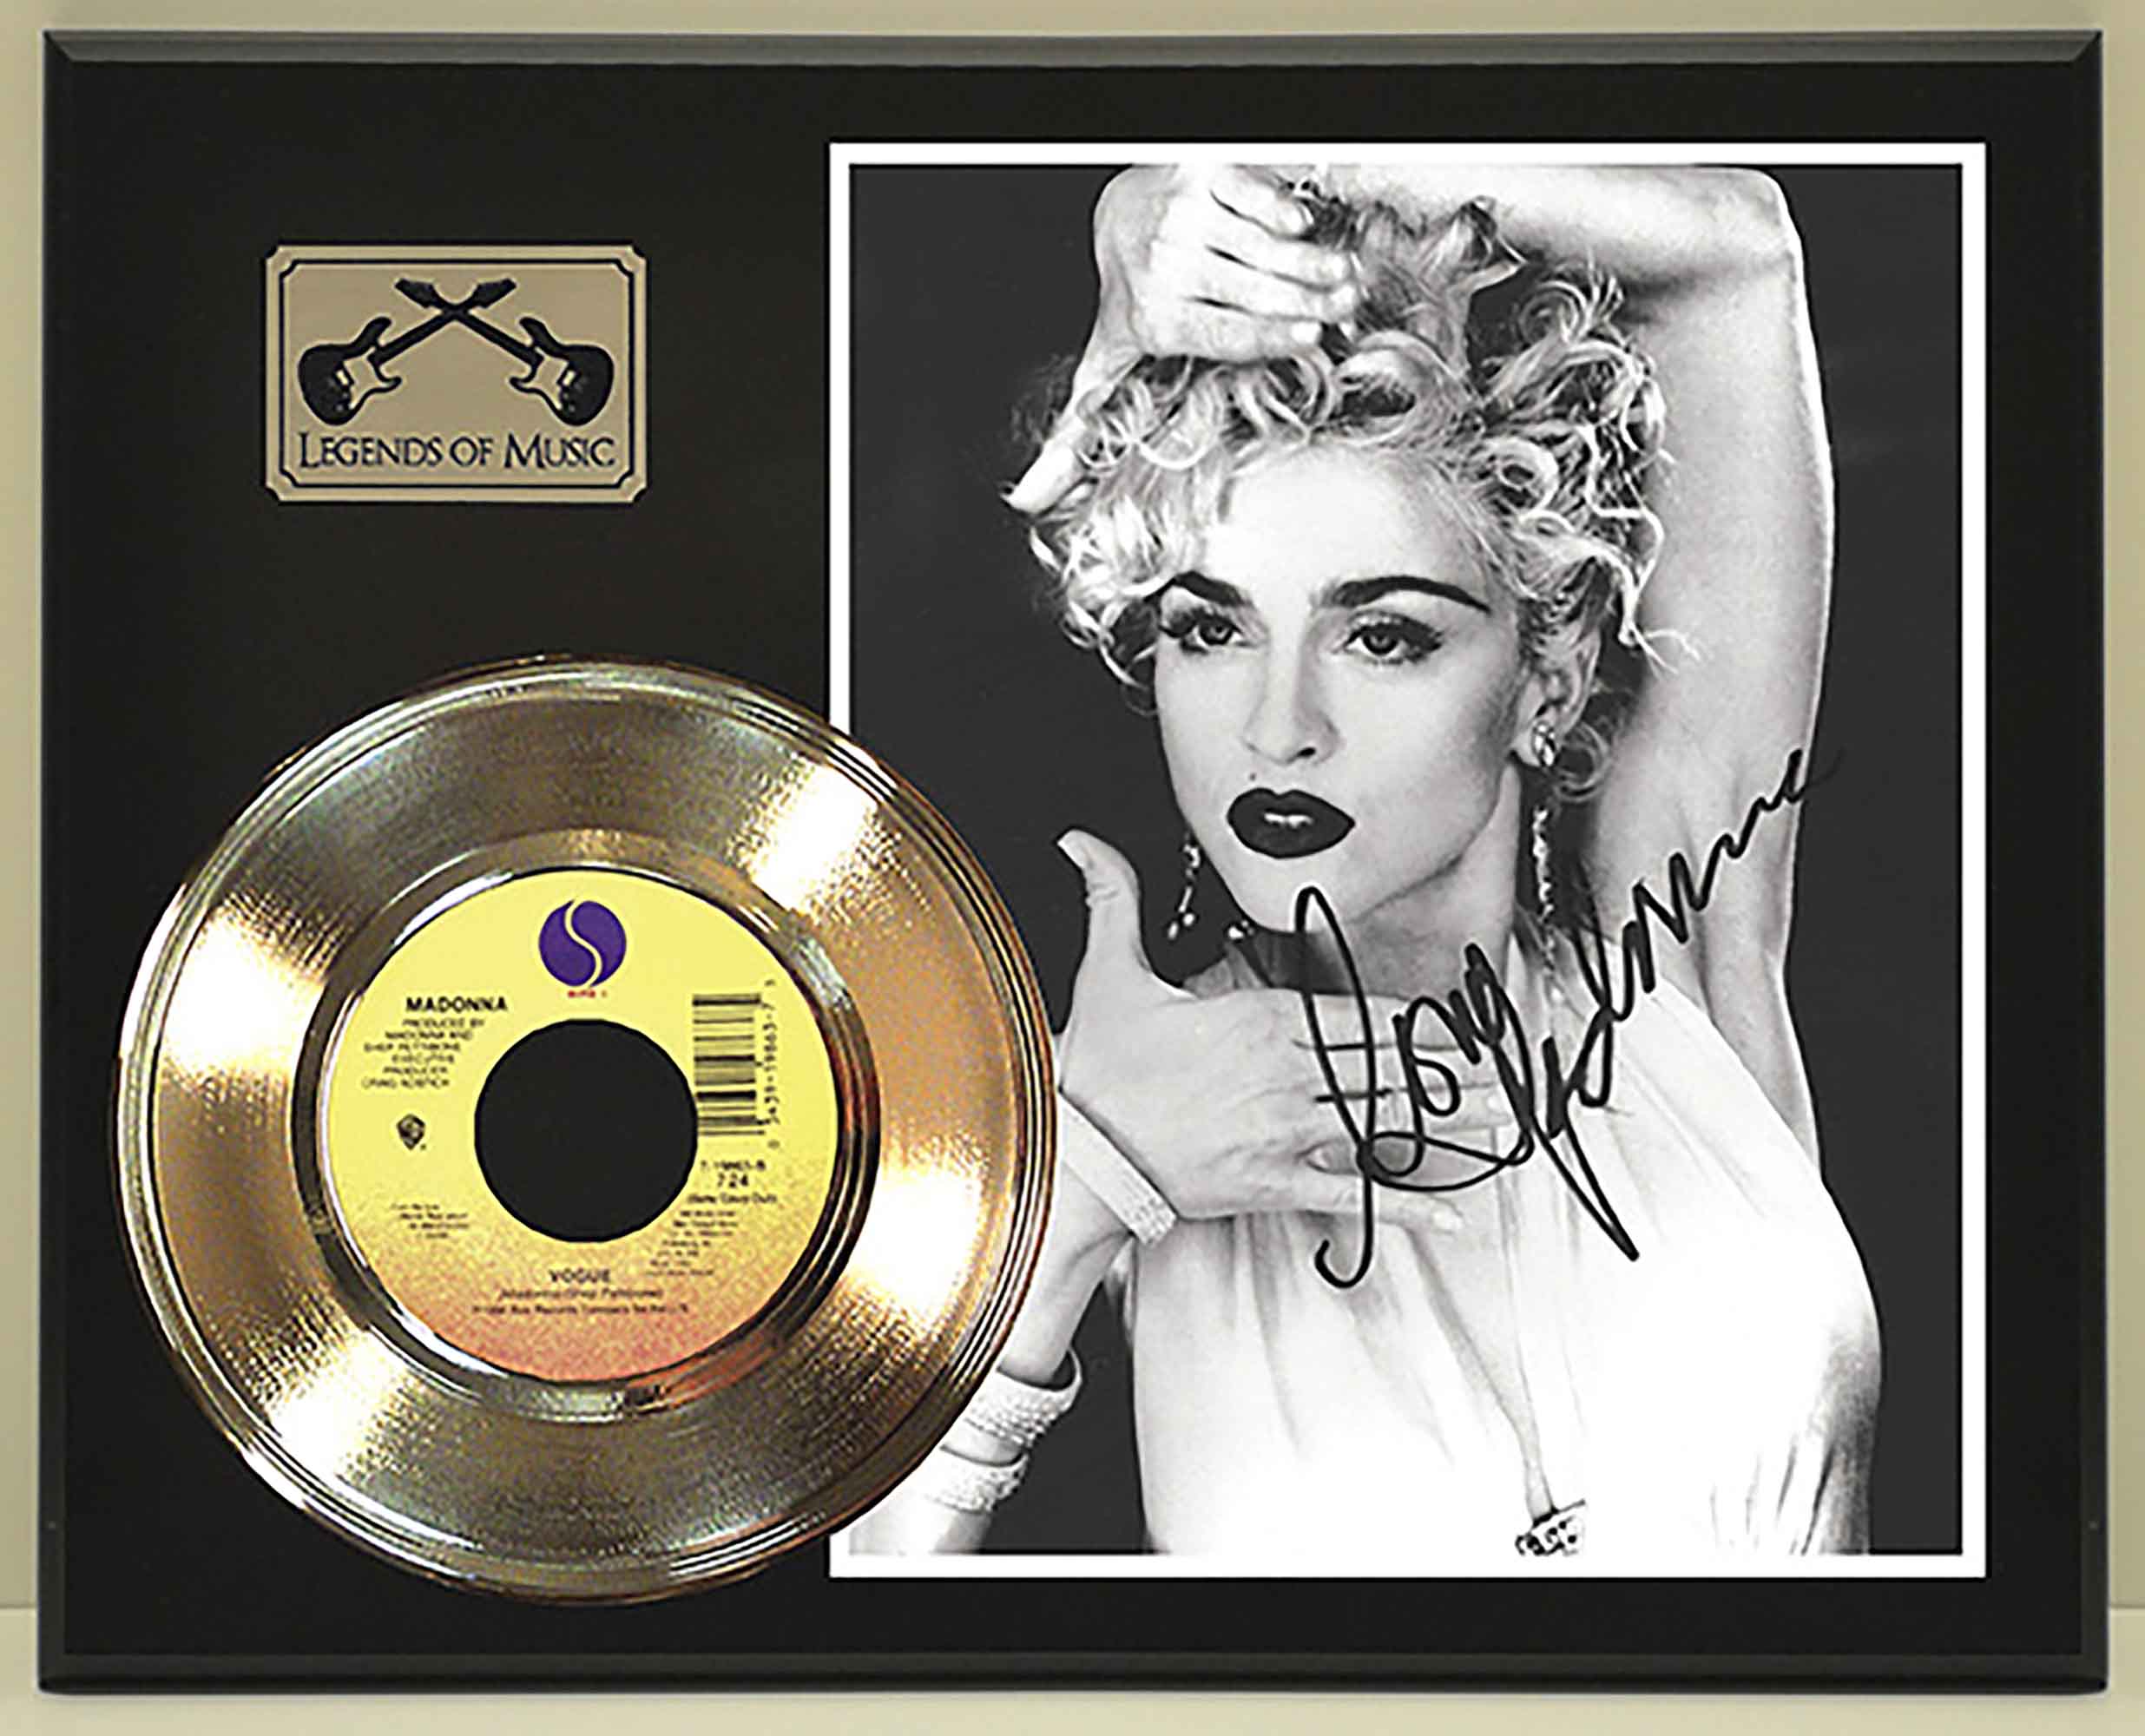 Madonna Unique Limited Edition Picture Disc CD Rare Collectible Music  Display - Gold Record Outlet Album and Disc Collectible Memorabilia